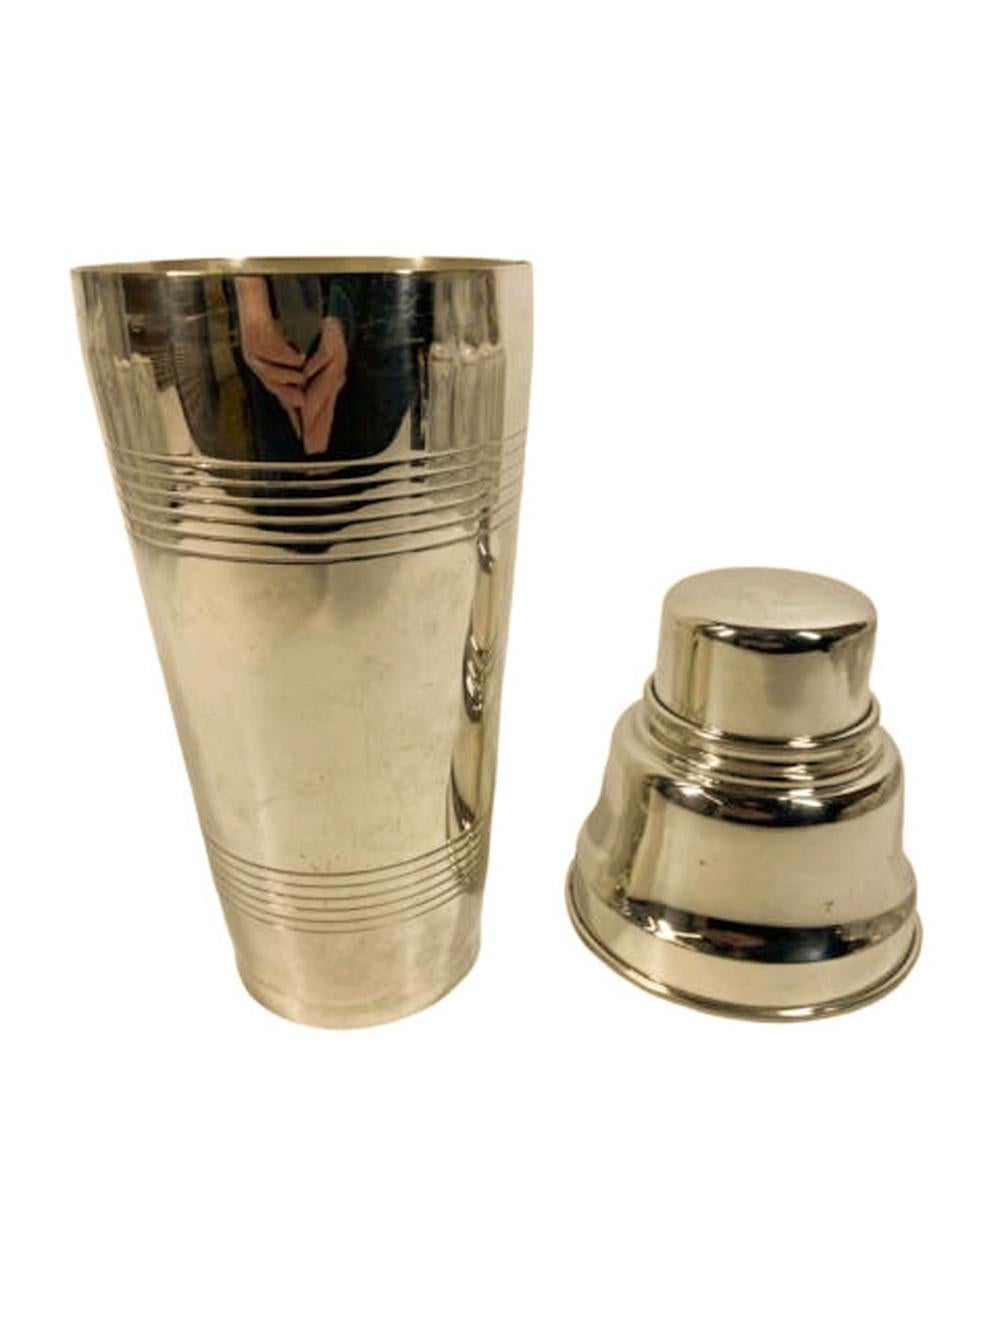 English Art Deco Silver Plate Cobbler Type Cocktail Shaker Made by Gaskell & Chambers For Sale